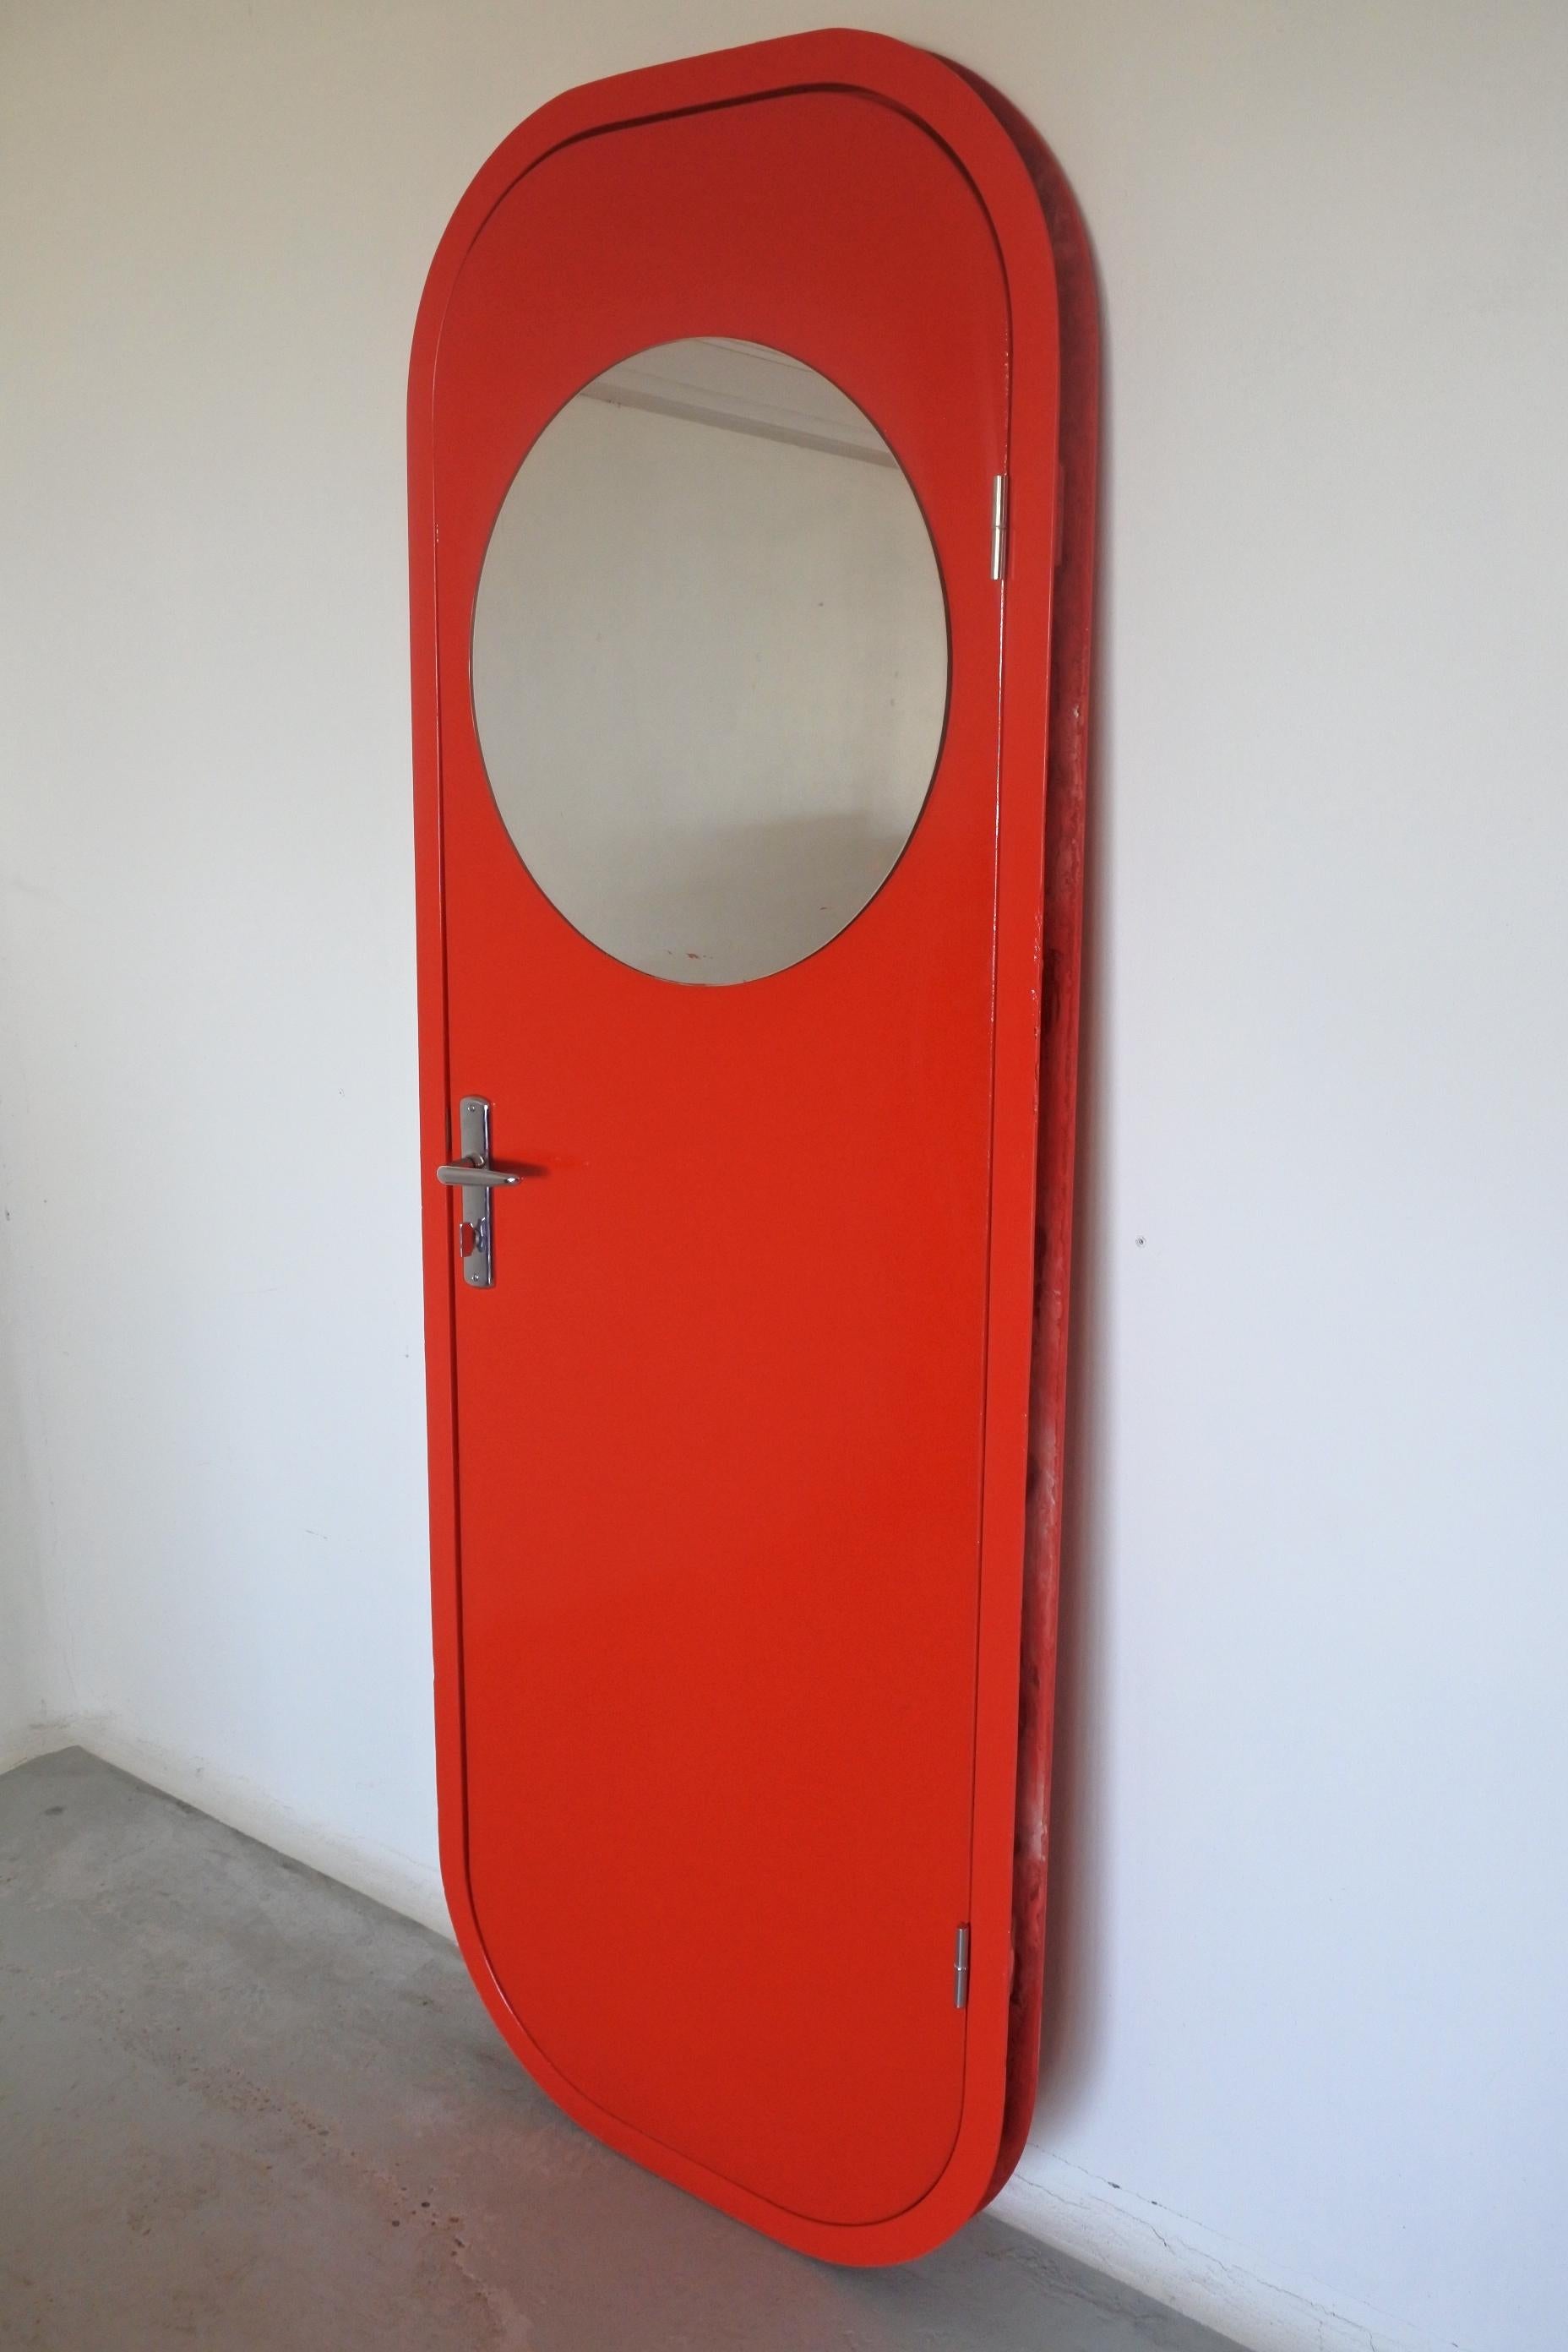 Charlotte Perriand.
Complete door with door frame, original mirror, original handles and hinges.
Red lacquered fiberglass and chromed metal.

Designed Les Arcs ski resort in the french Alps. 
This door was installed in an apartment in Les Arcs